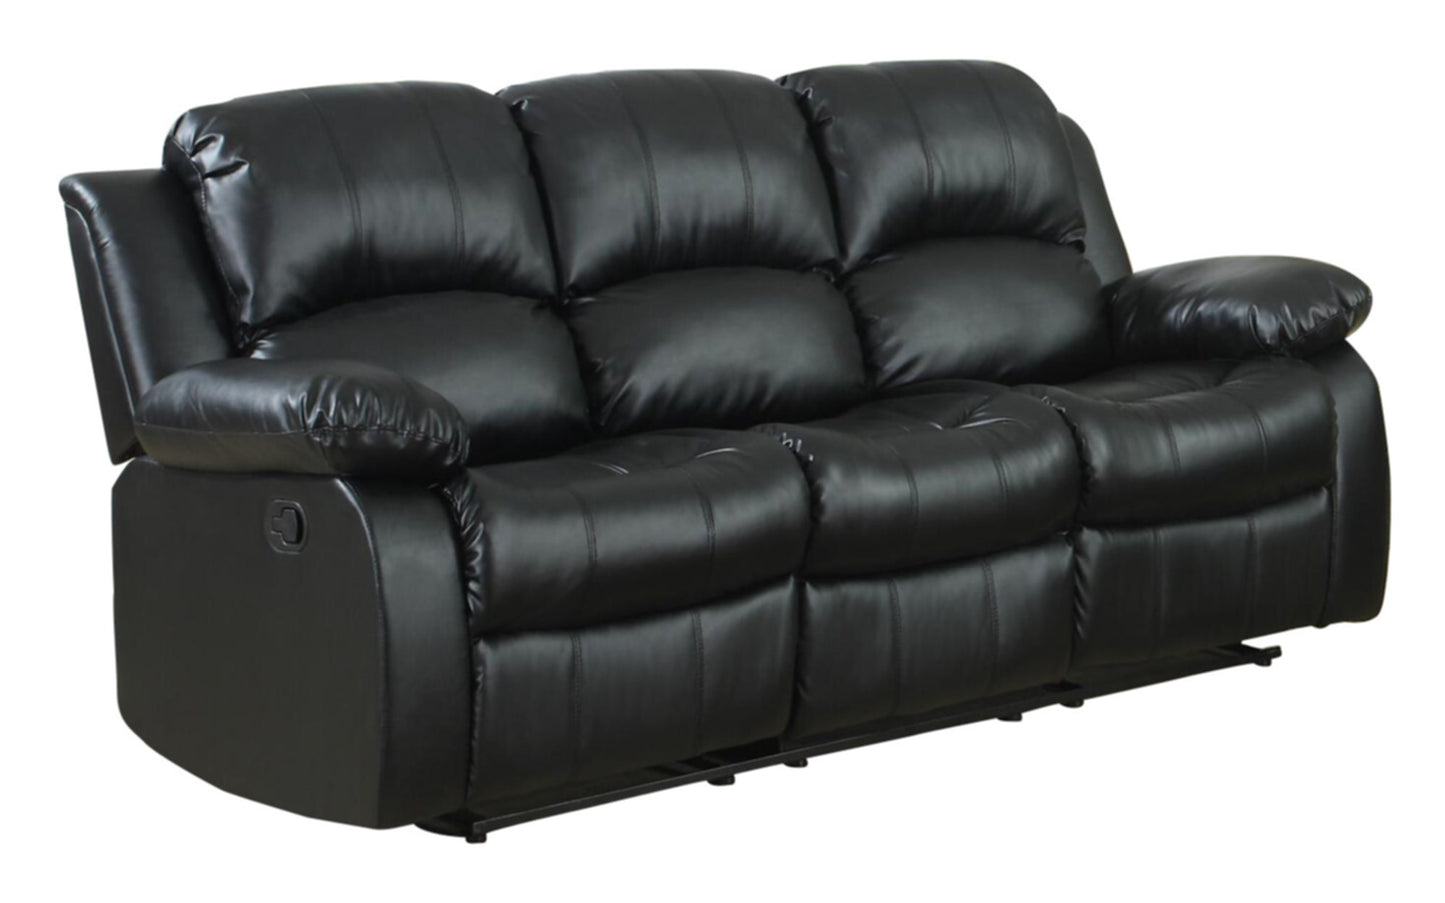 Homelegance Cranley 2PC Set Double Reclining Sofa & Love Seat in Leather - Black